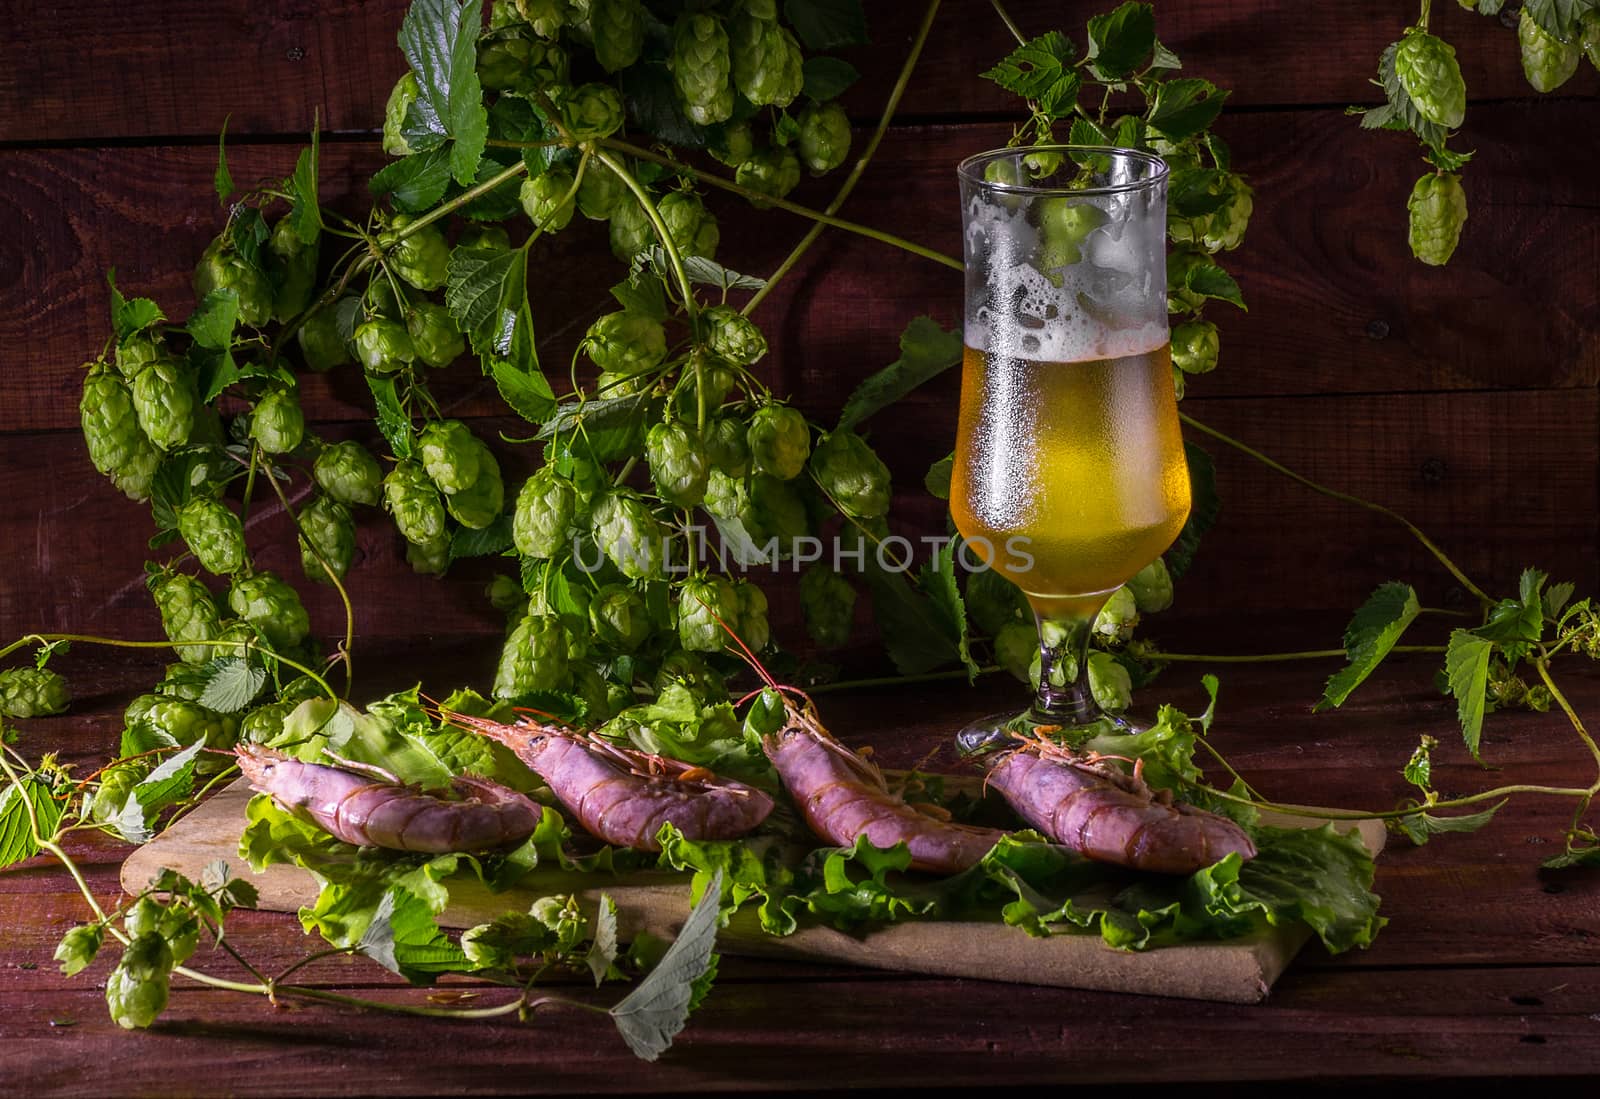 still life with Beer, shrimps and salad on a wooden table